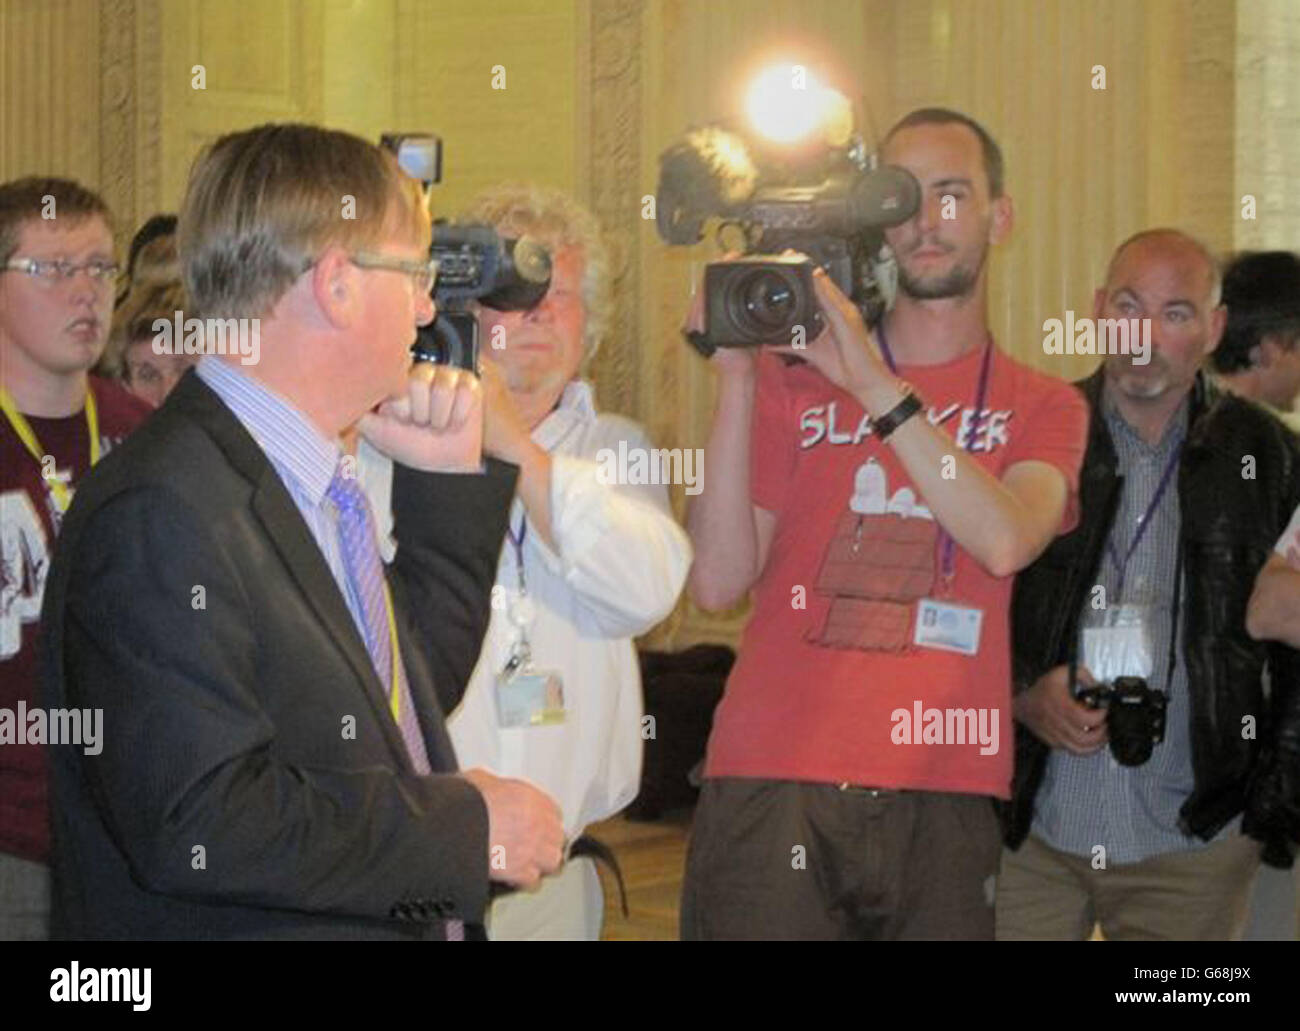 Prominent loyalist flag protester Willie Frazer (2nd left) at the Stormont Assembly in Belfast, shortly before he was arrested by the PSNI for breach of bail conditions. Stock Photo